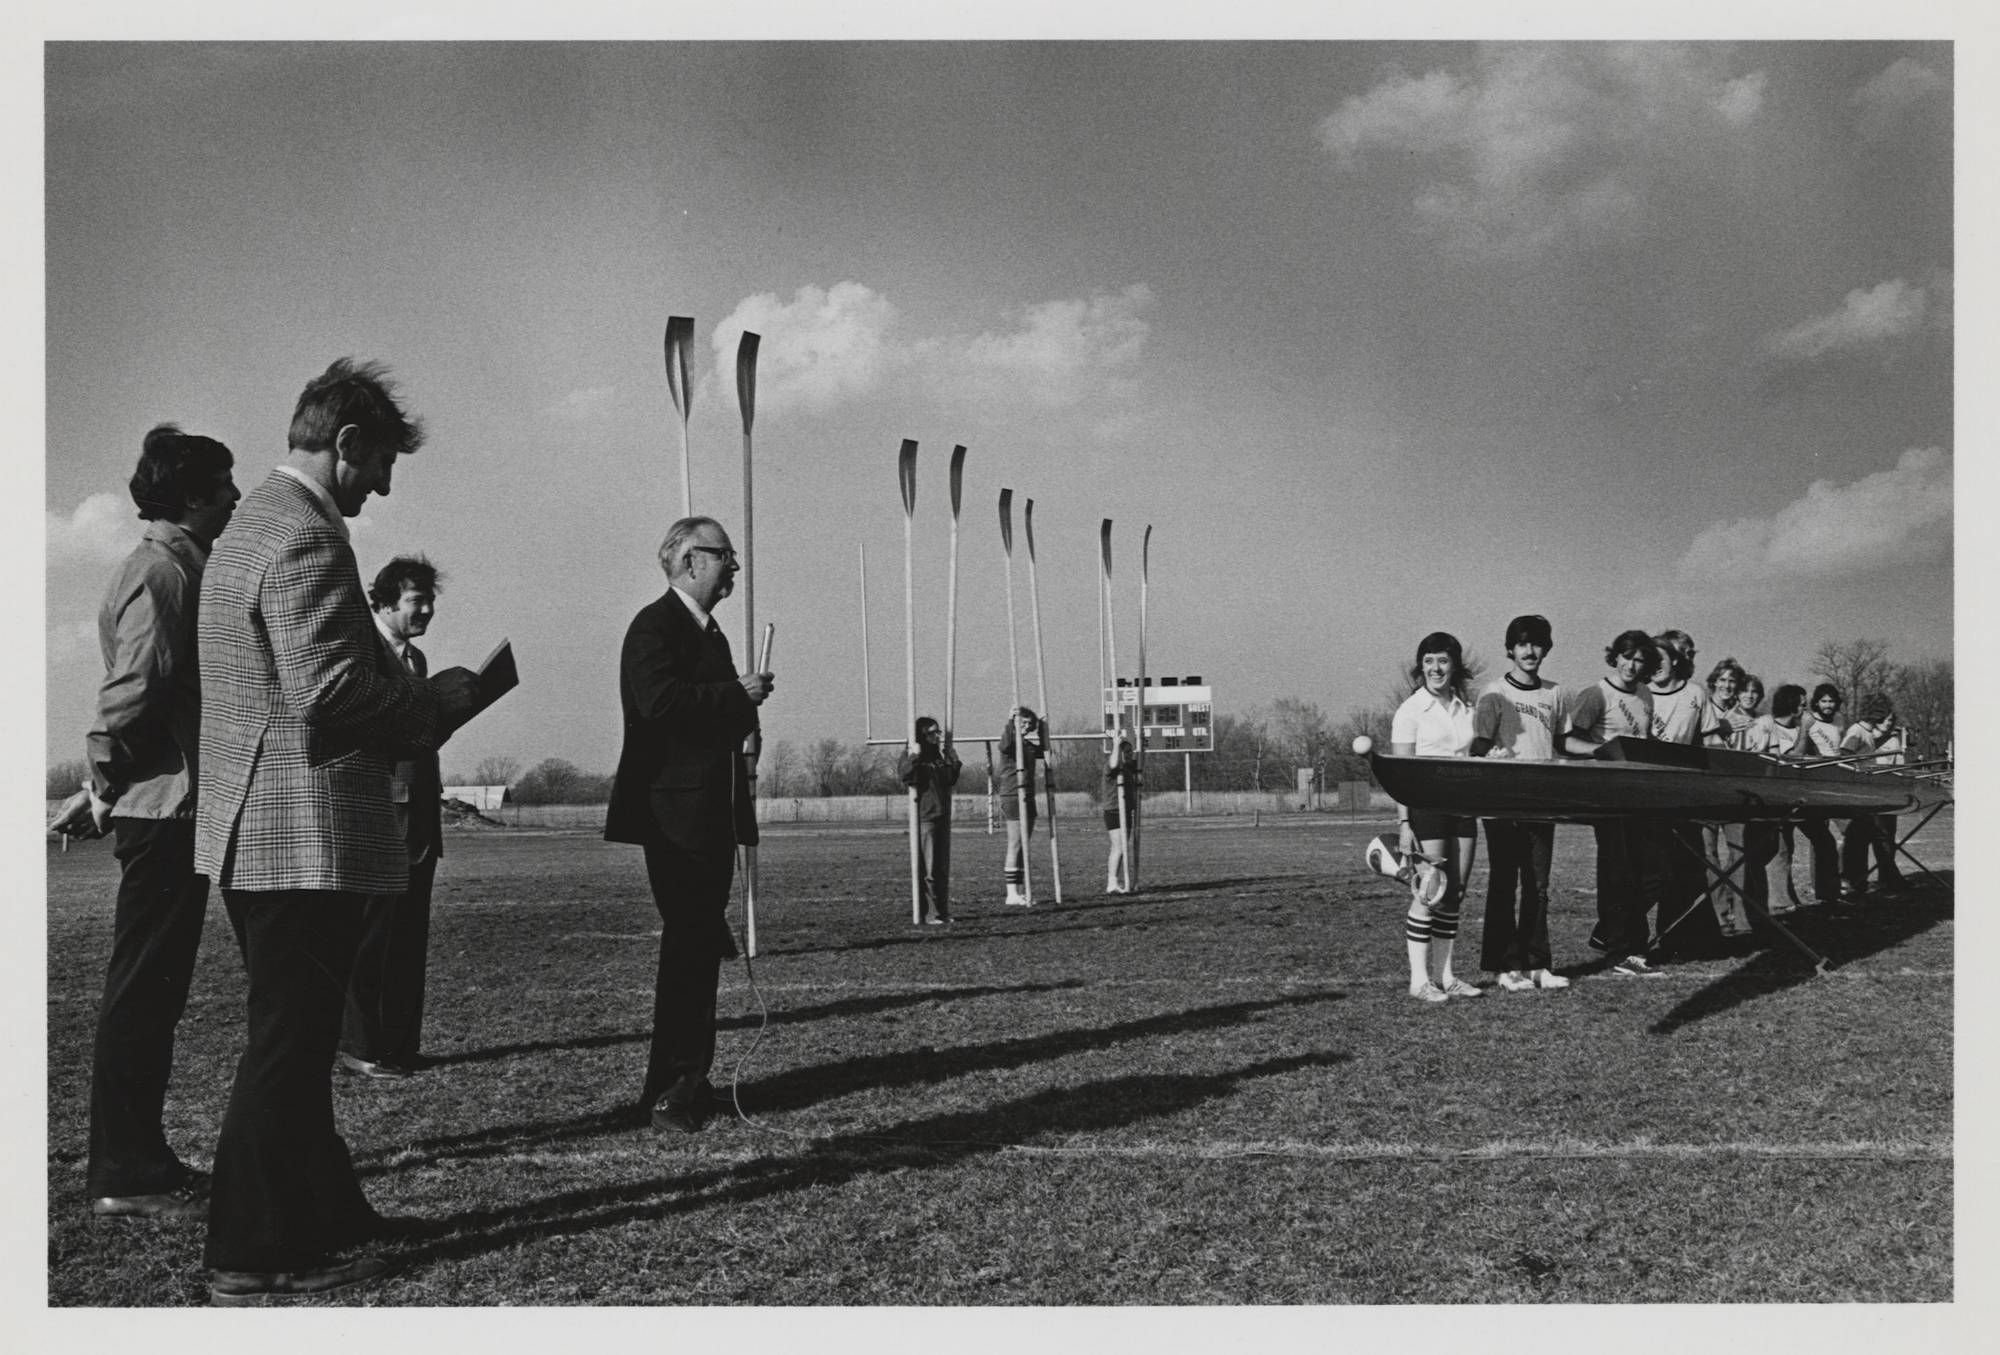 Members of the rowing team stand on the football field with university officials to dedicate a new rowing shell